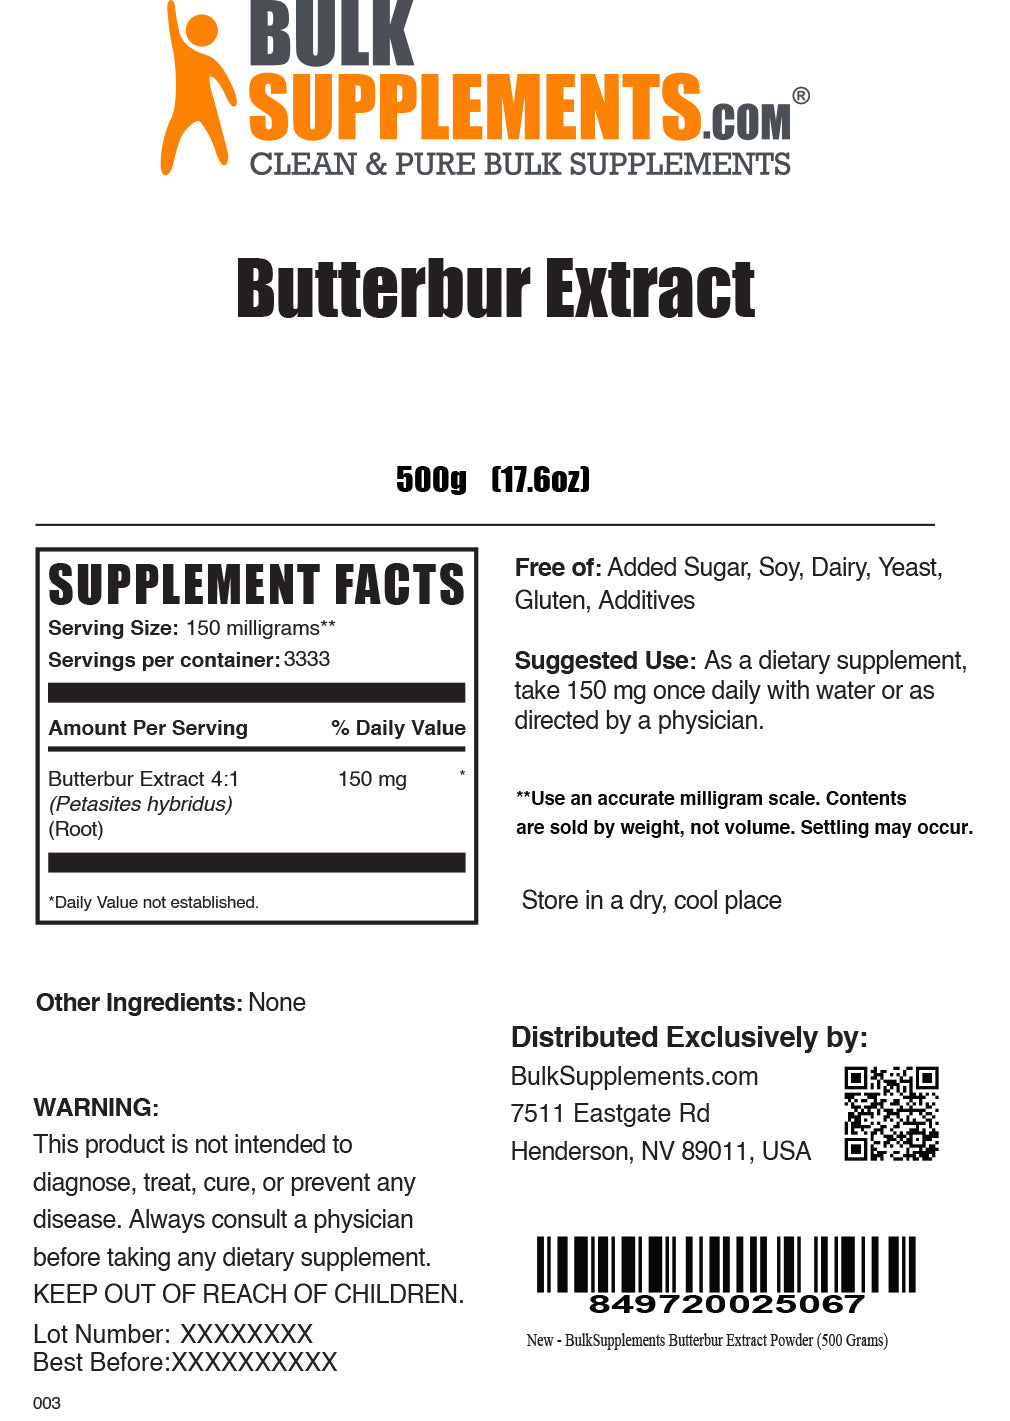 500g of Butterbur extract supplement facts